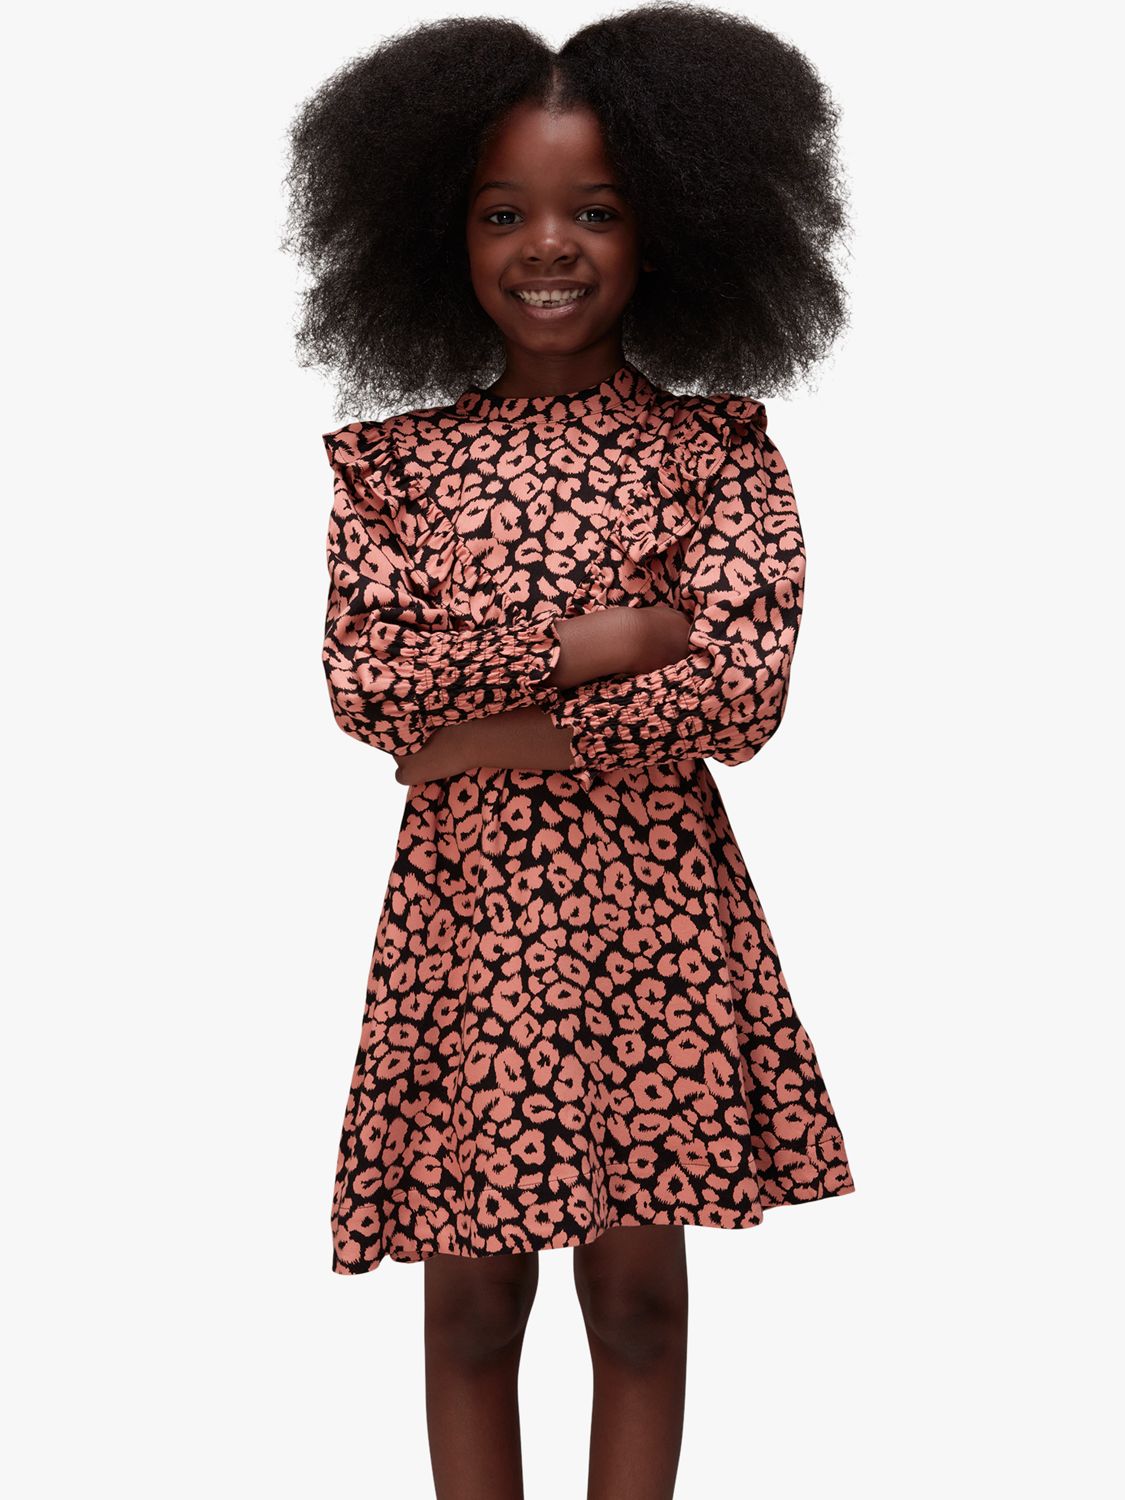 Buy Whistles Kids' Avery Fuzzy Leopard Dress, Pink/Multi Online at johnlewis.com